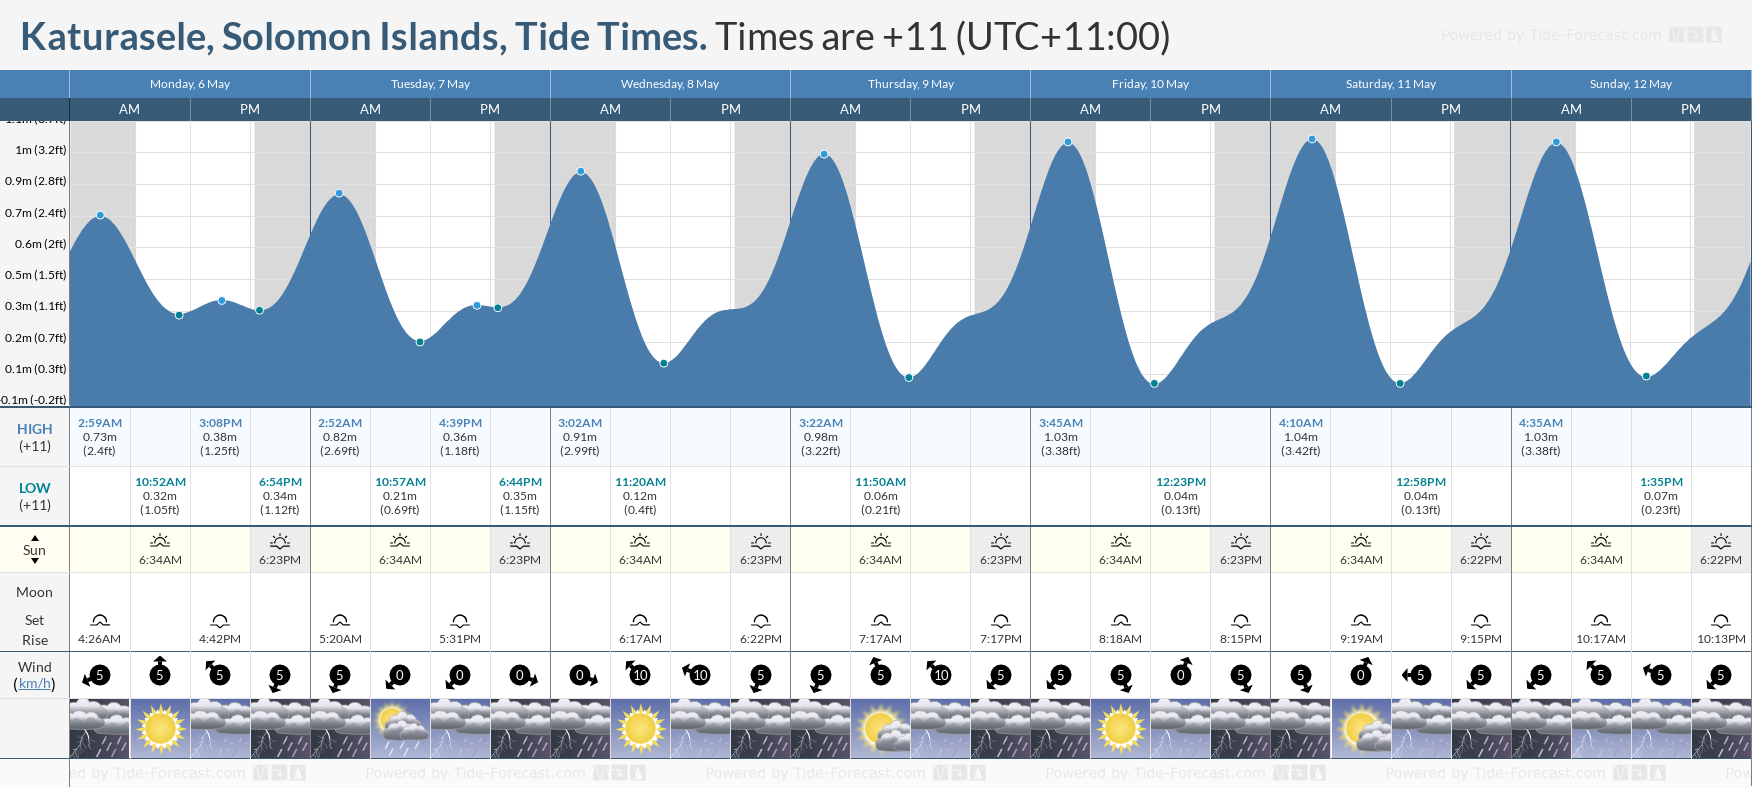 Katurasele, Solomon Islands Tide Chart including high and low tide tide times for the next 7 days